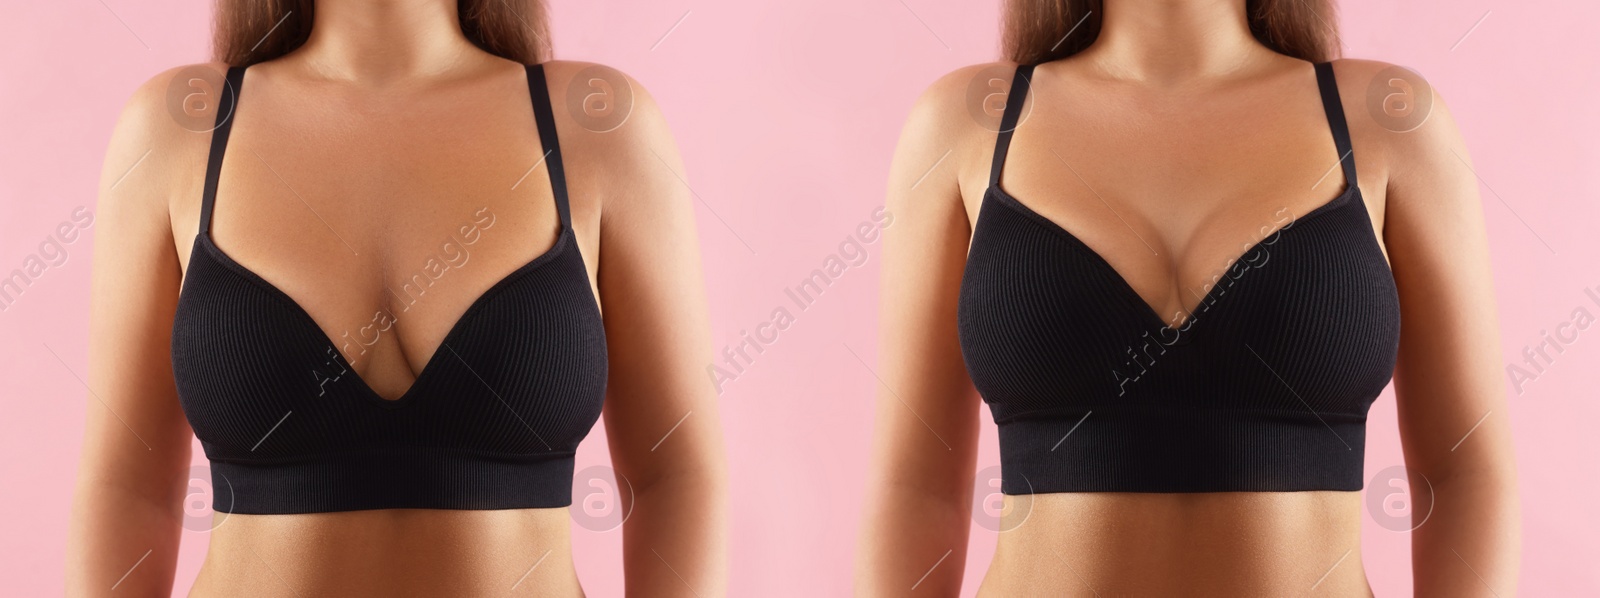 Image of Collage with photos of woman before and after breast-lift surgery on pink background, closeup